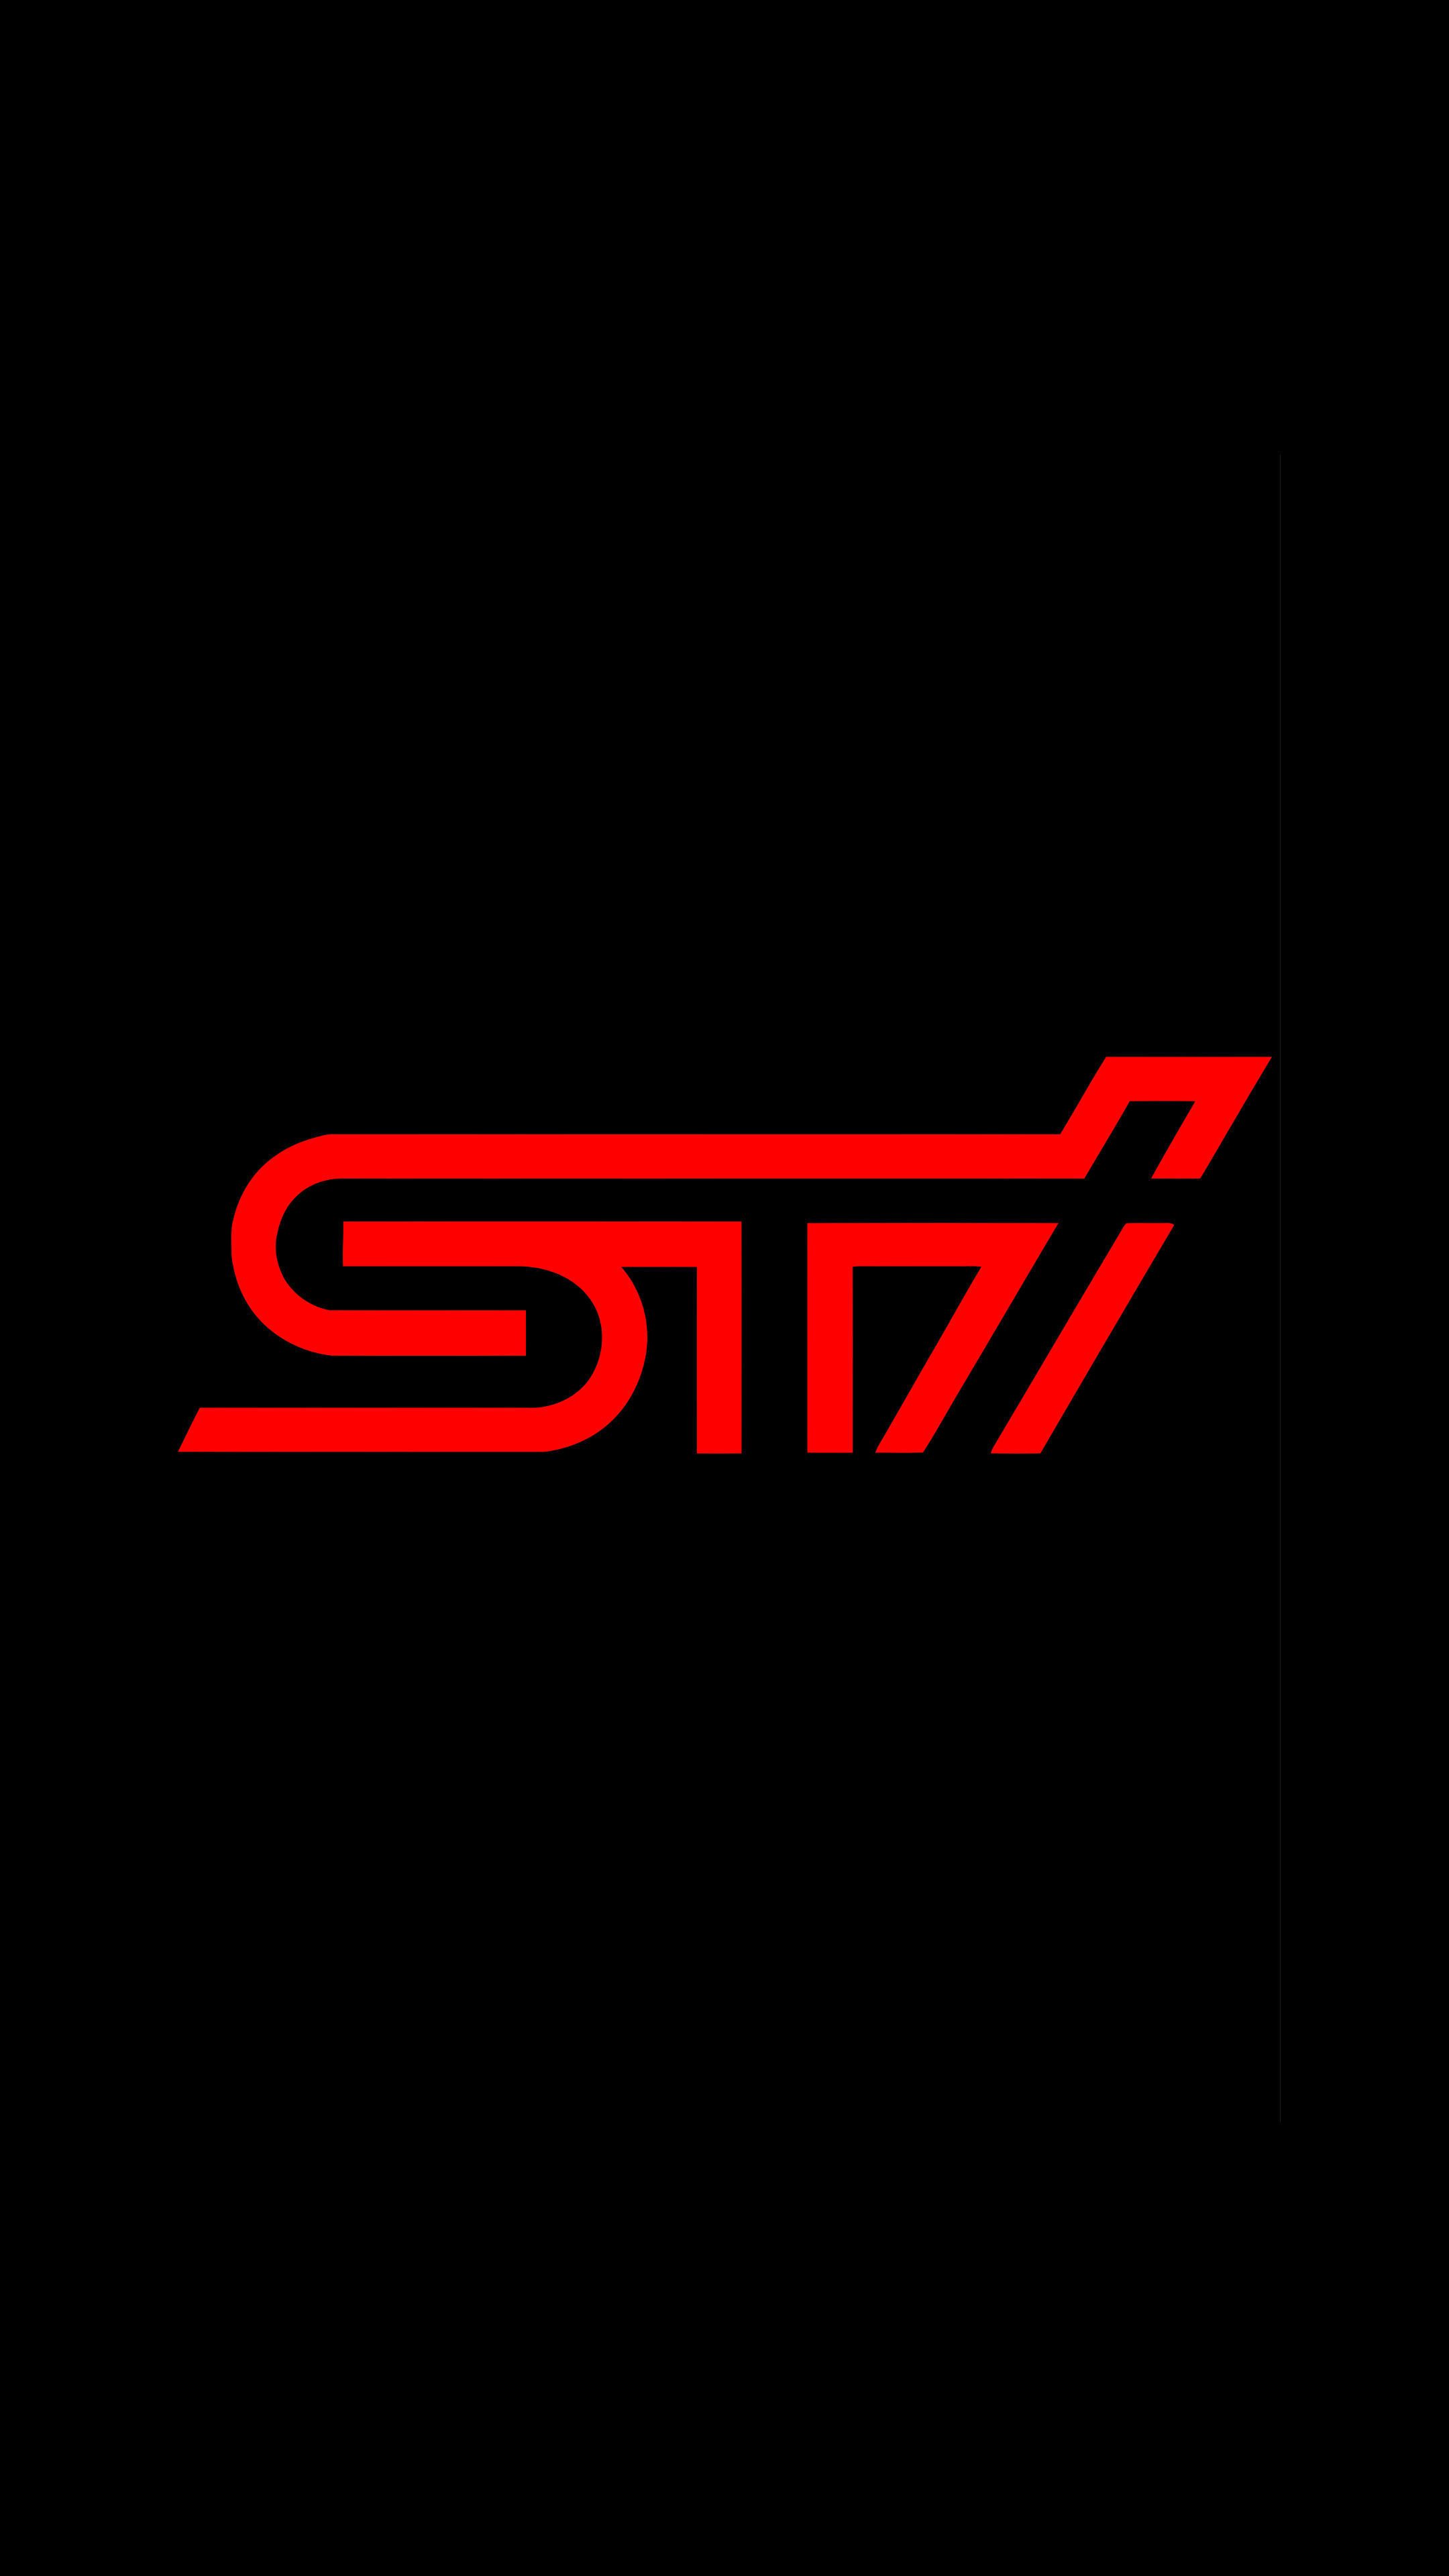 I made this STI wallpaper for a request on another sub, was told youd like it